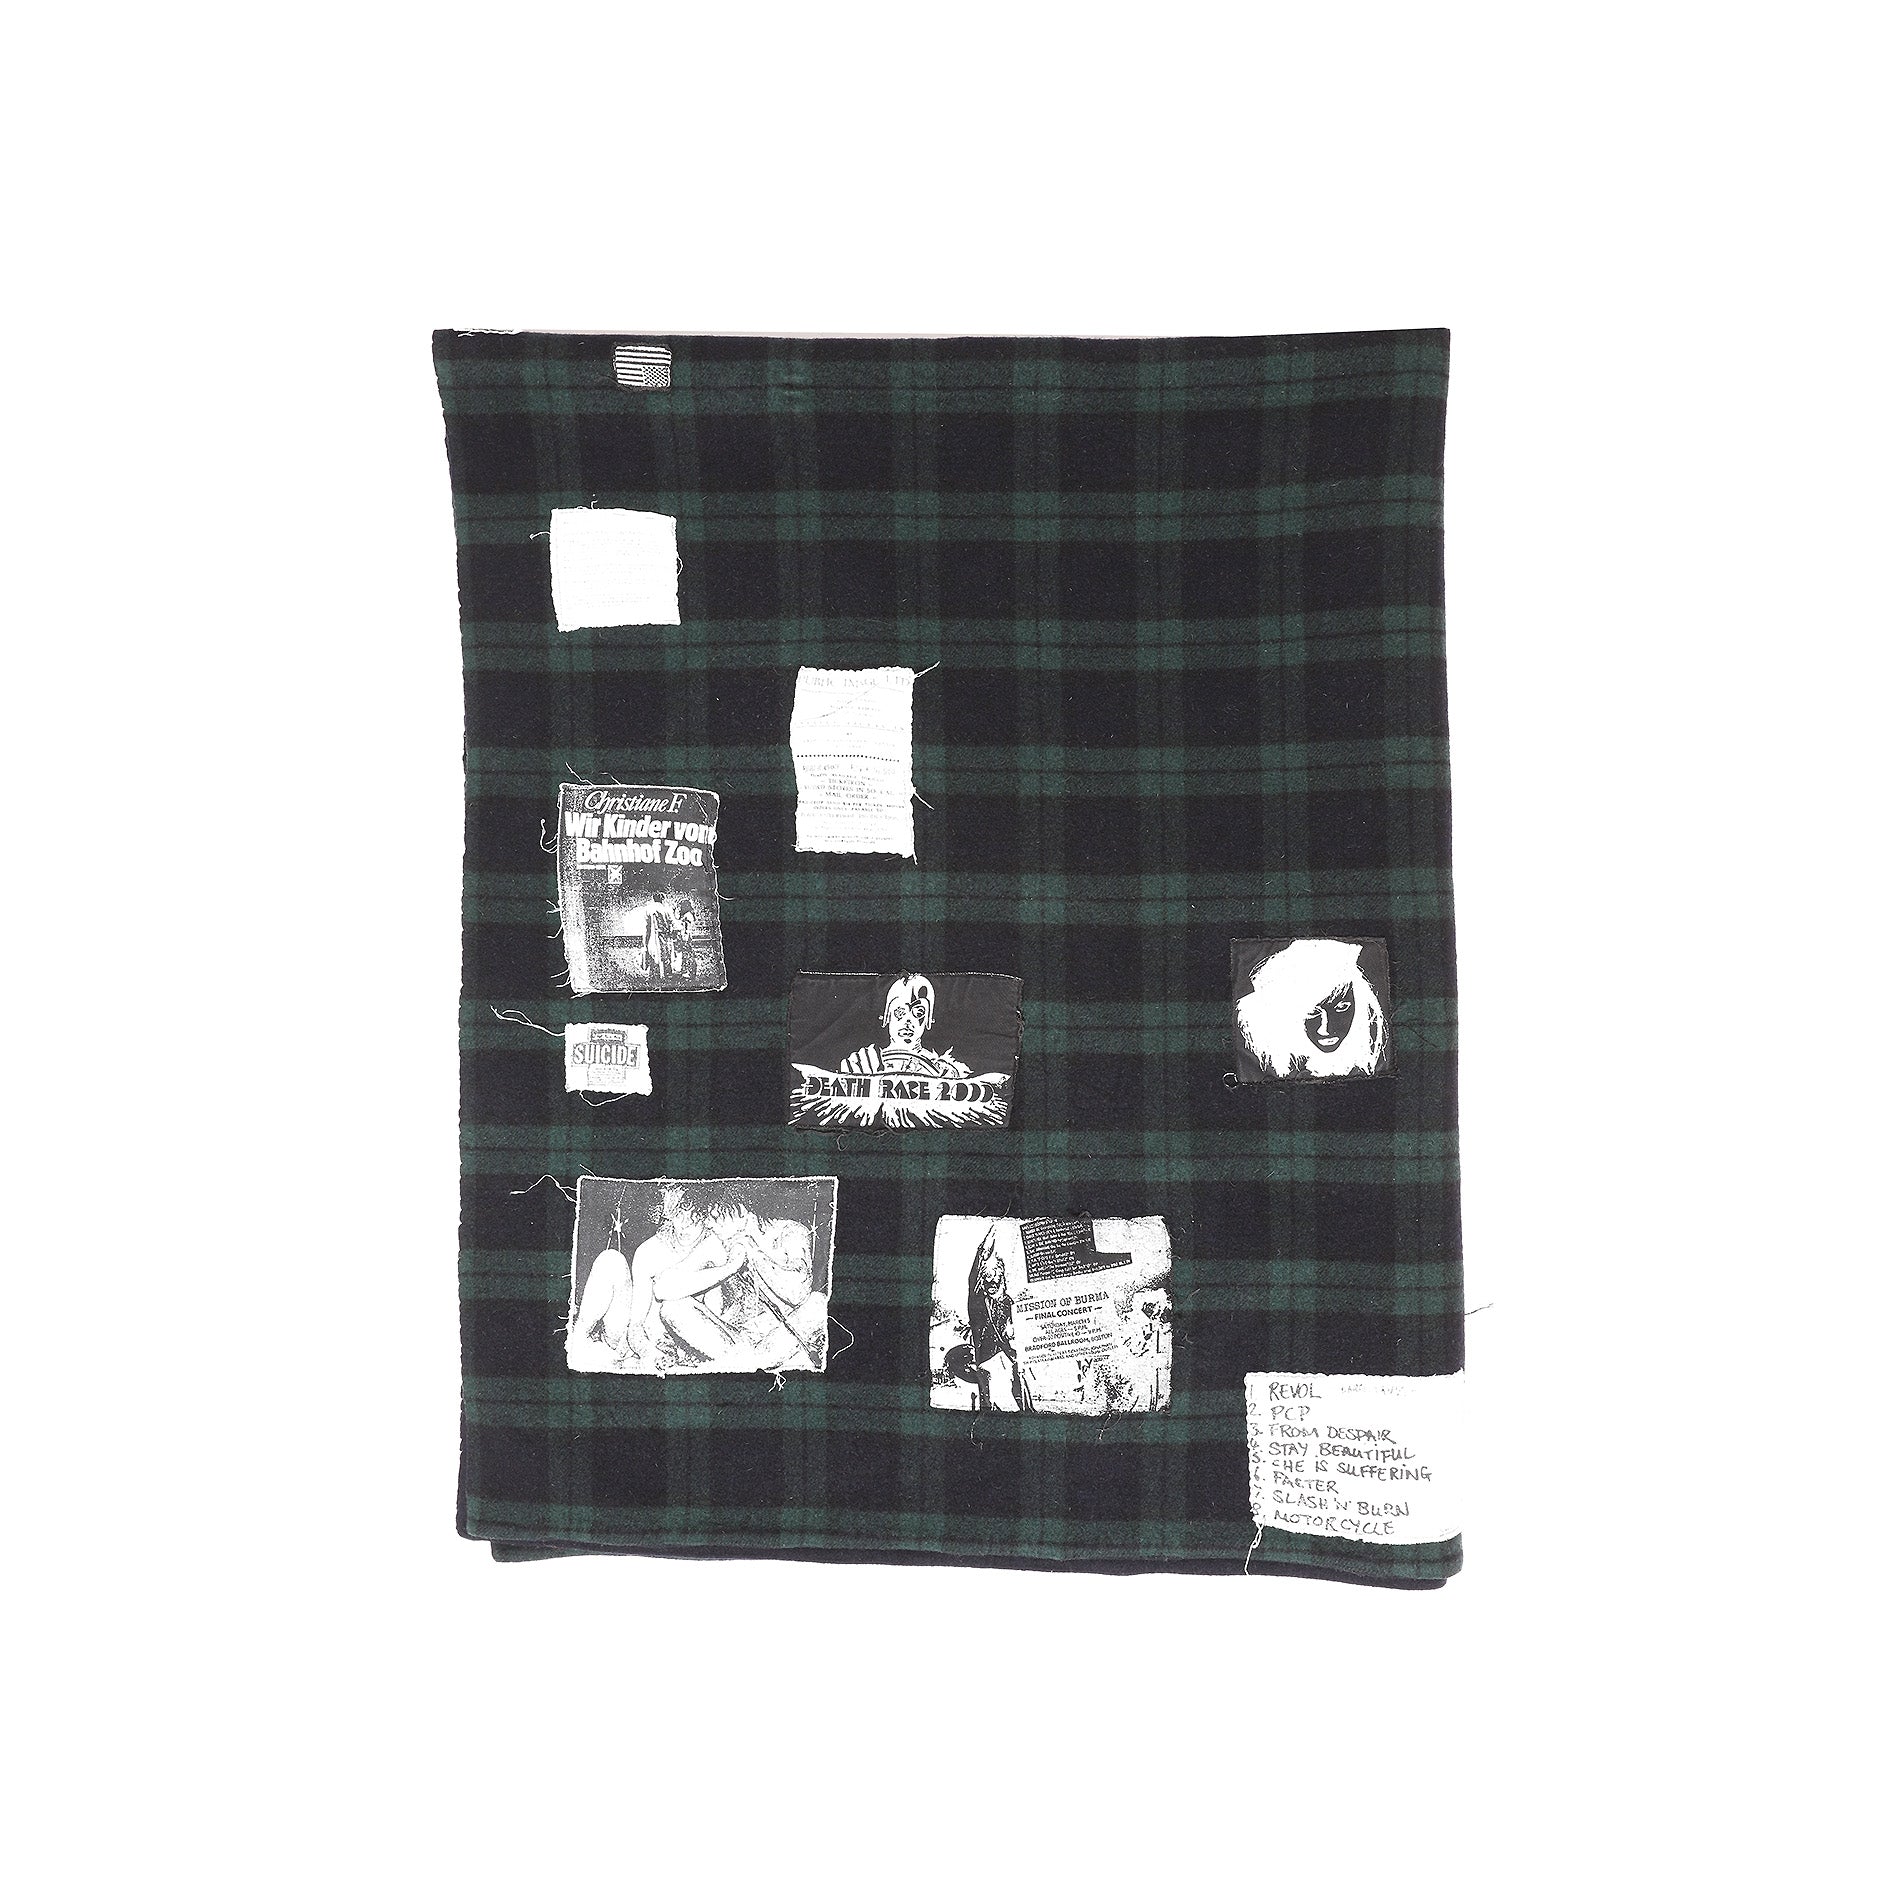 Raf Simons 2005 Limited Re-Edition Riot,Riot,Riot Patched Plaid Blanket